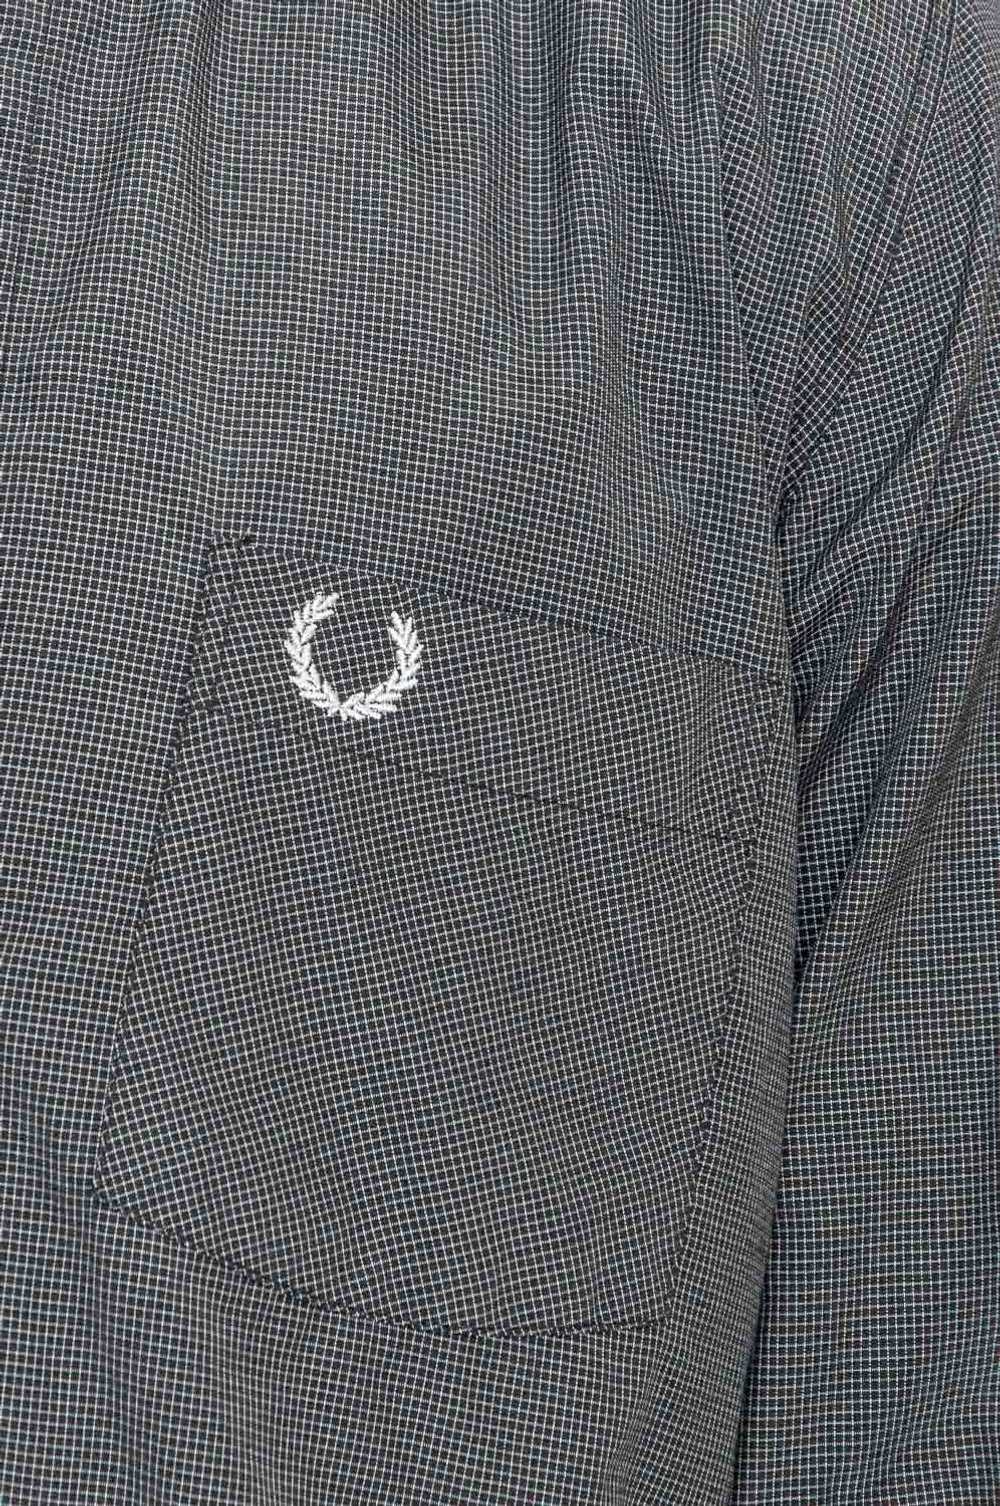 Fred Perry Small Checked Shirt Black and white - image 4